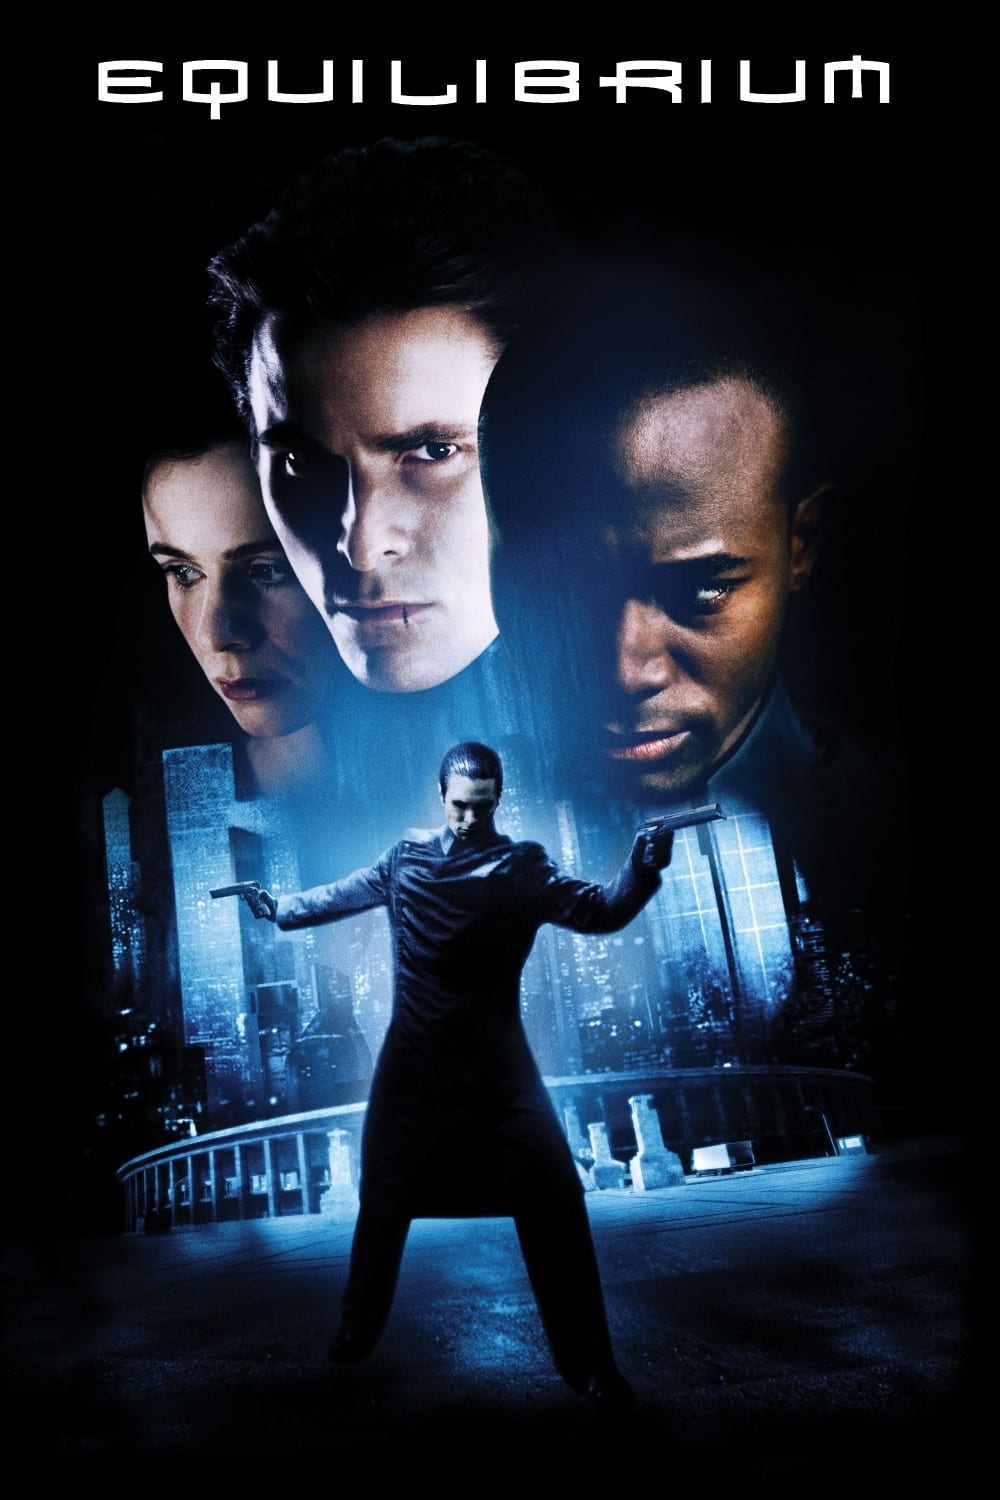 Poster for the movie "Equilibrium"